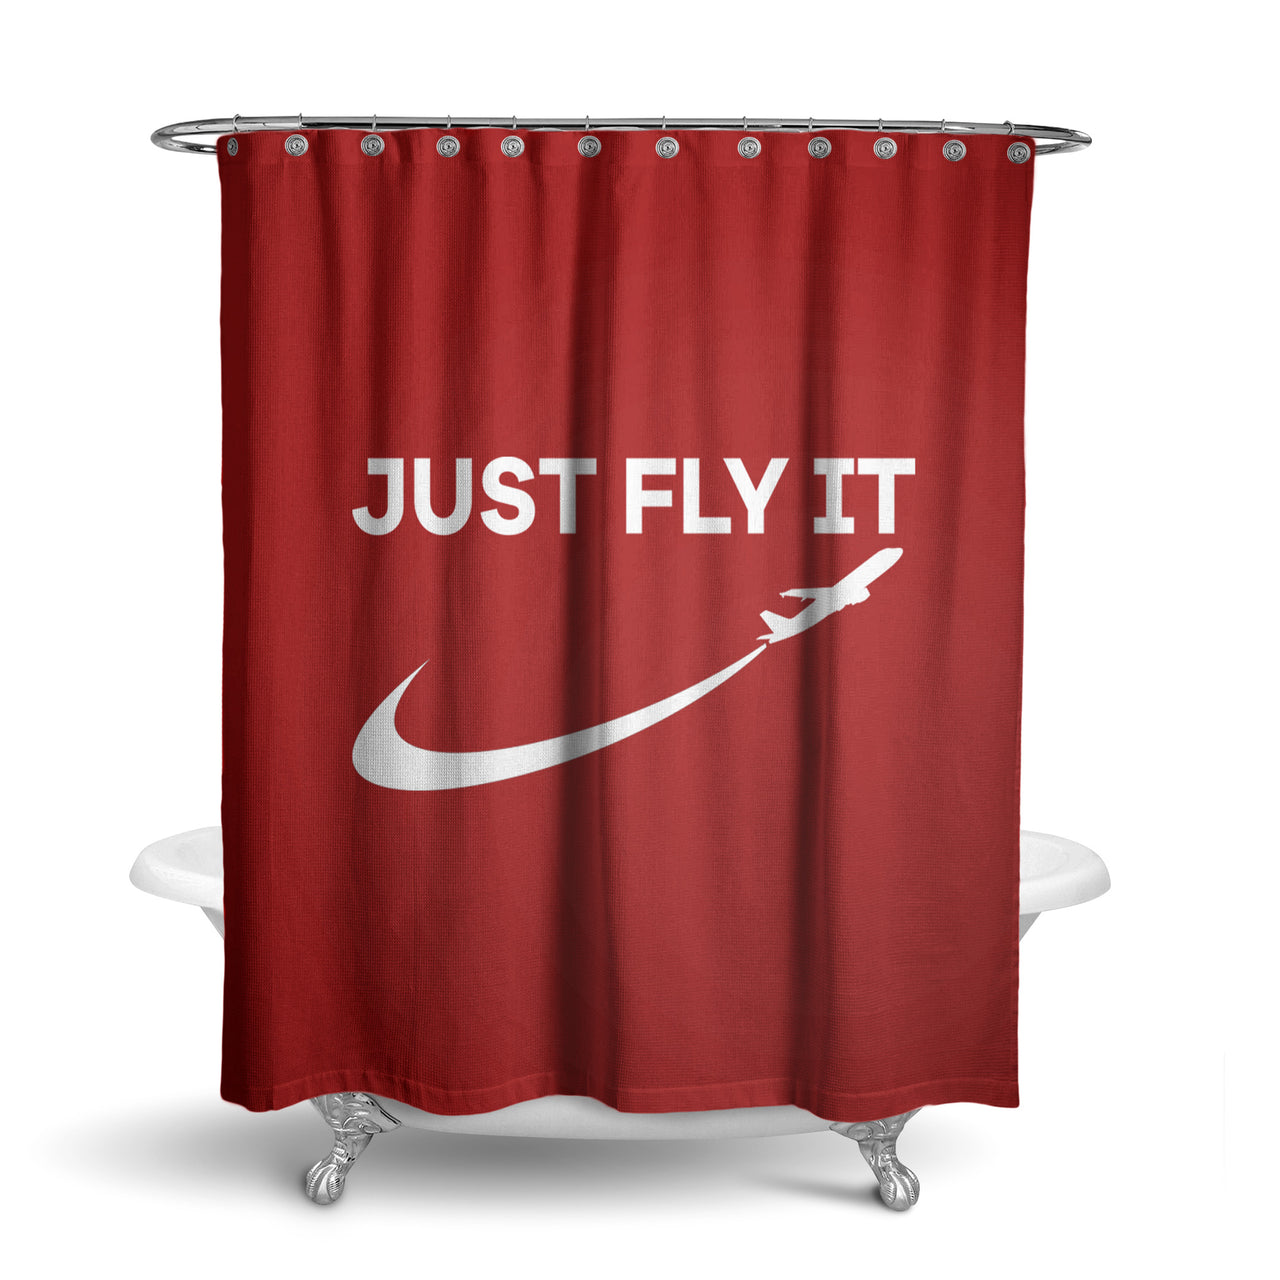 Just Fly It 2 Designed Shower Curtains